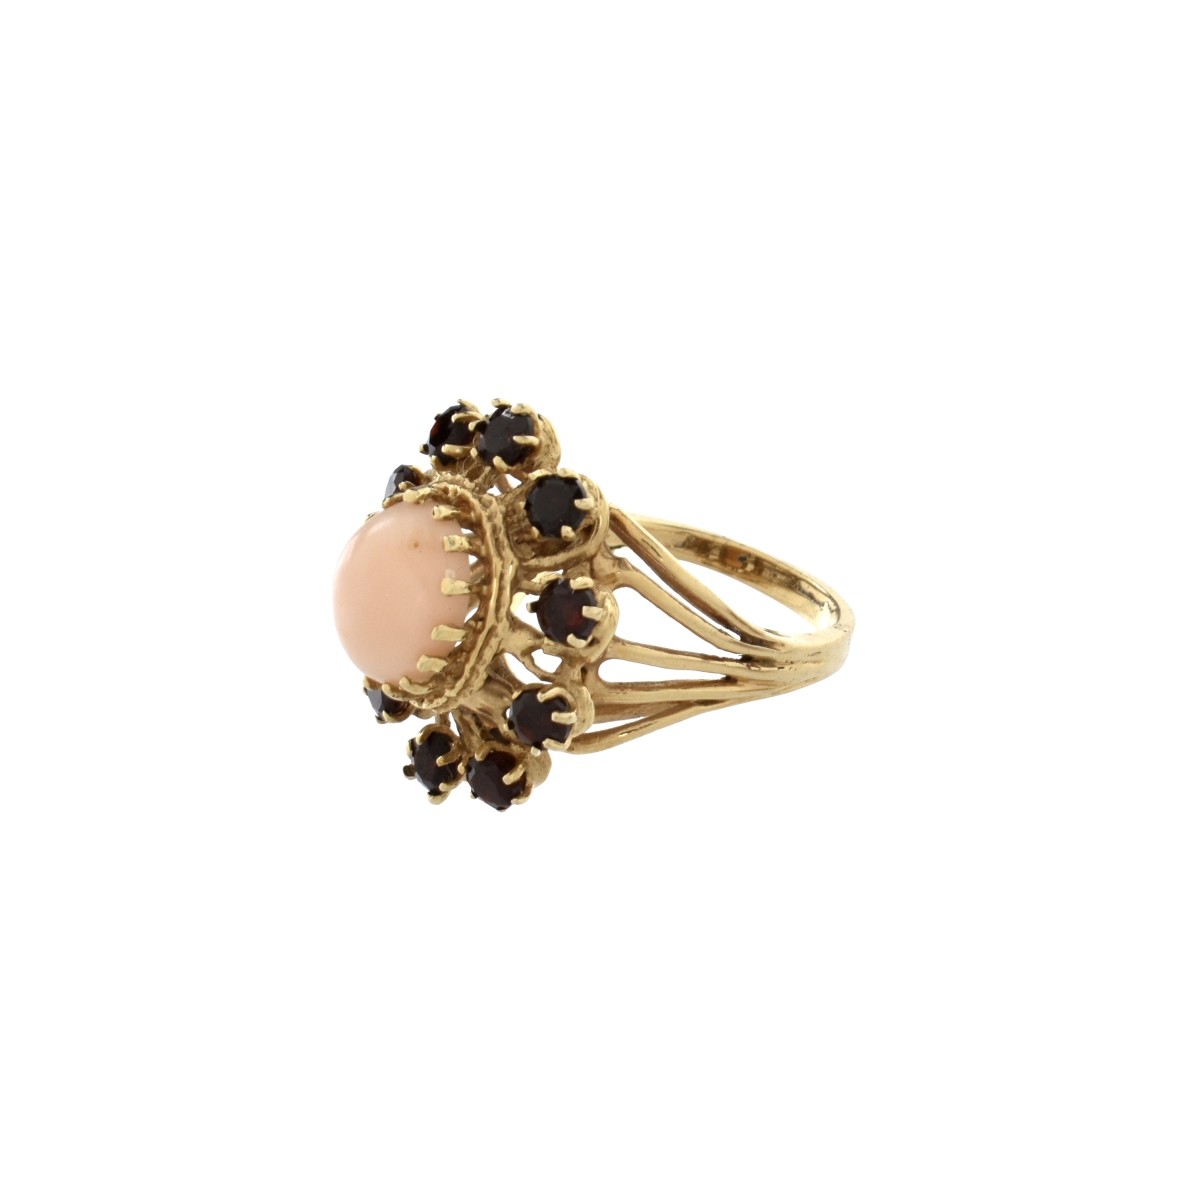 Coral, Garnet and 14K Ring